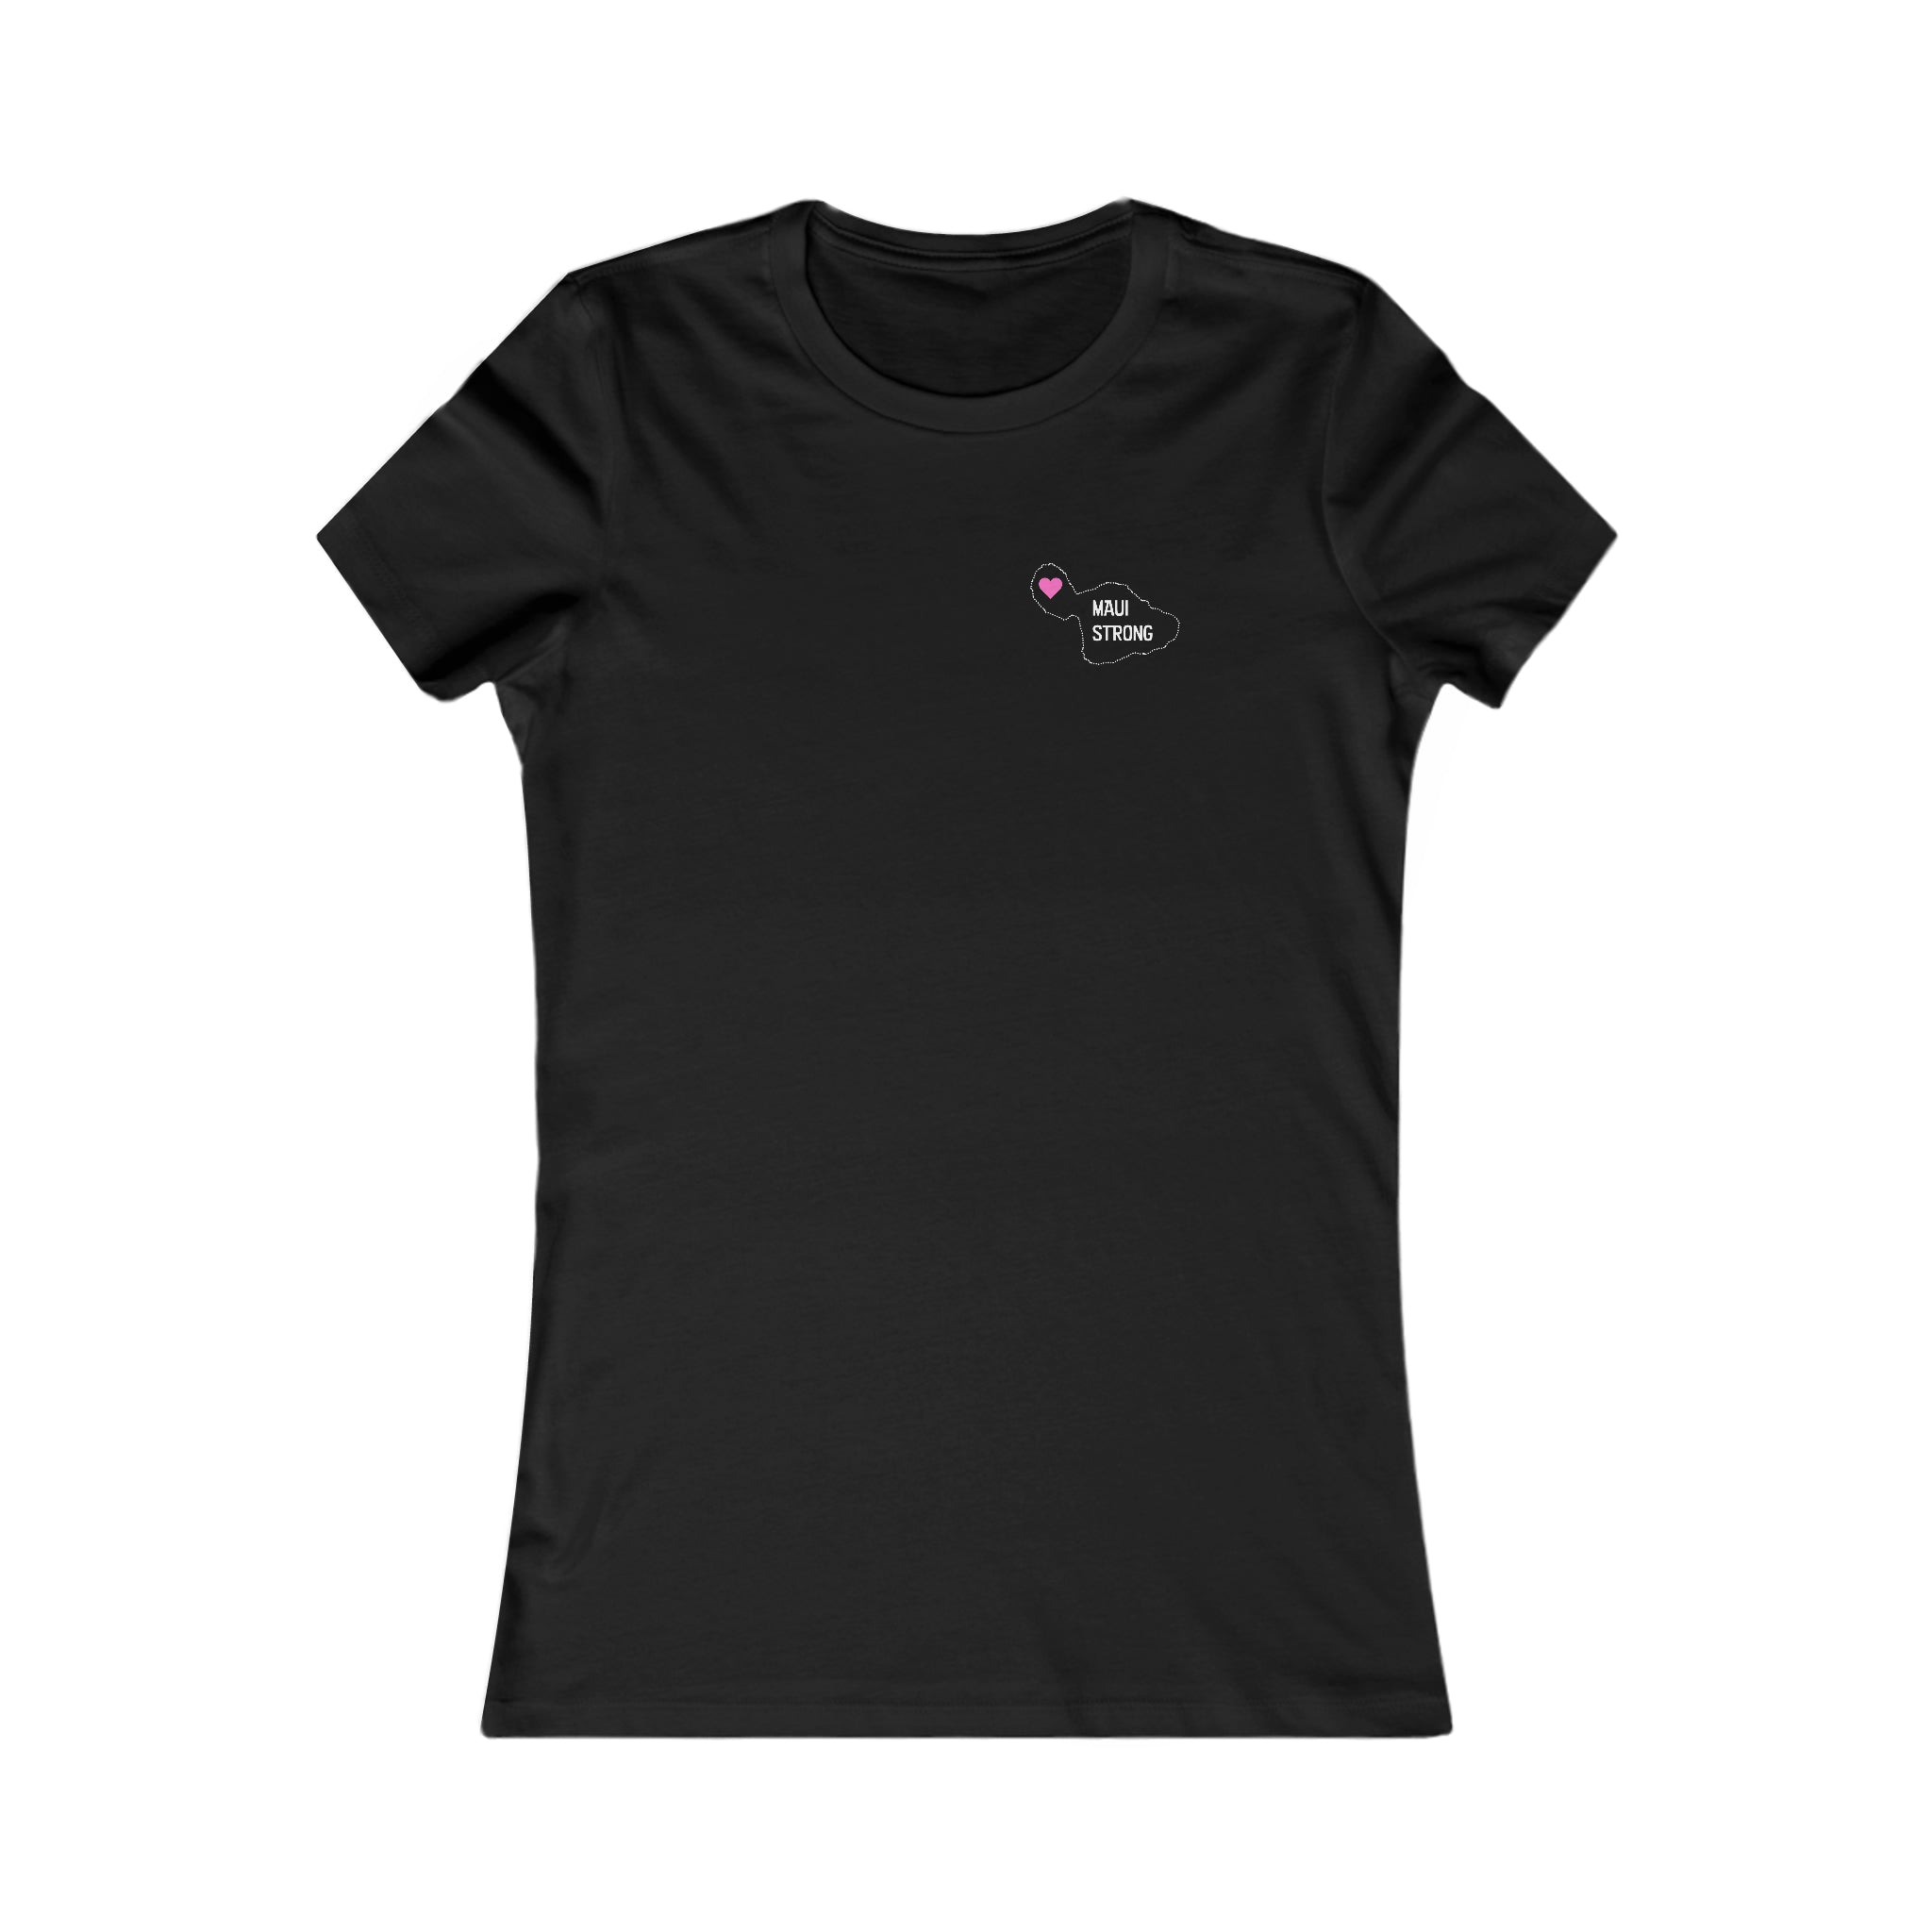 Women's Slim Fit Tee - Maui Strong